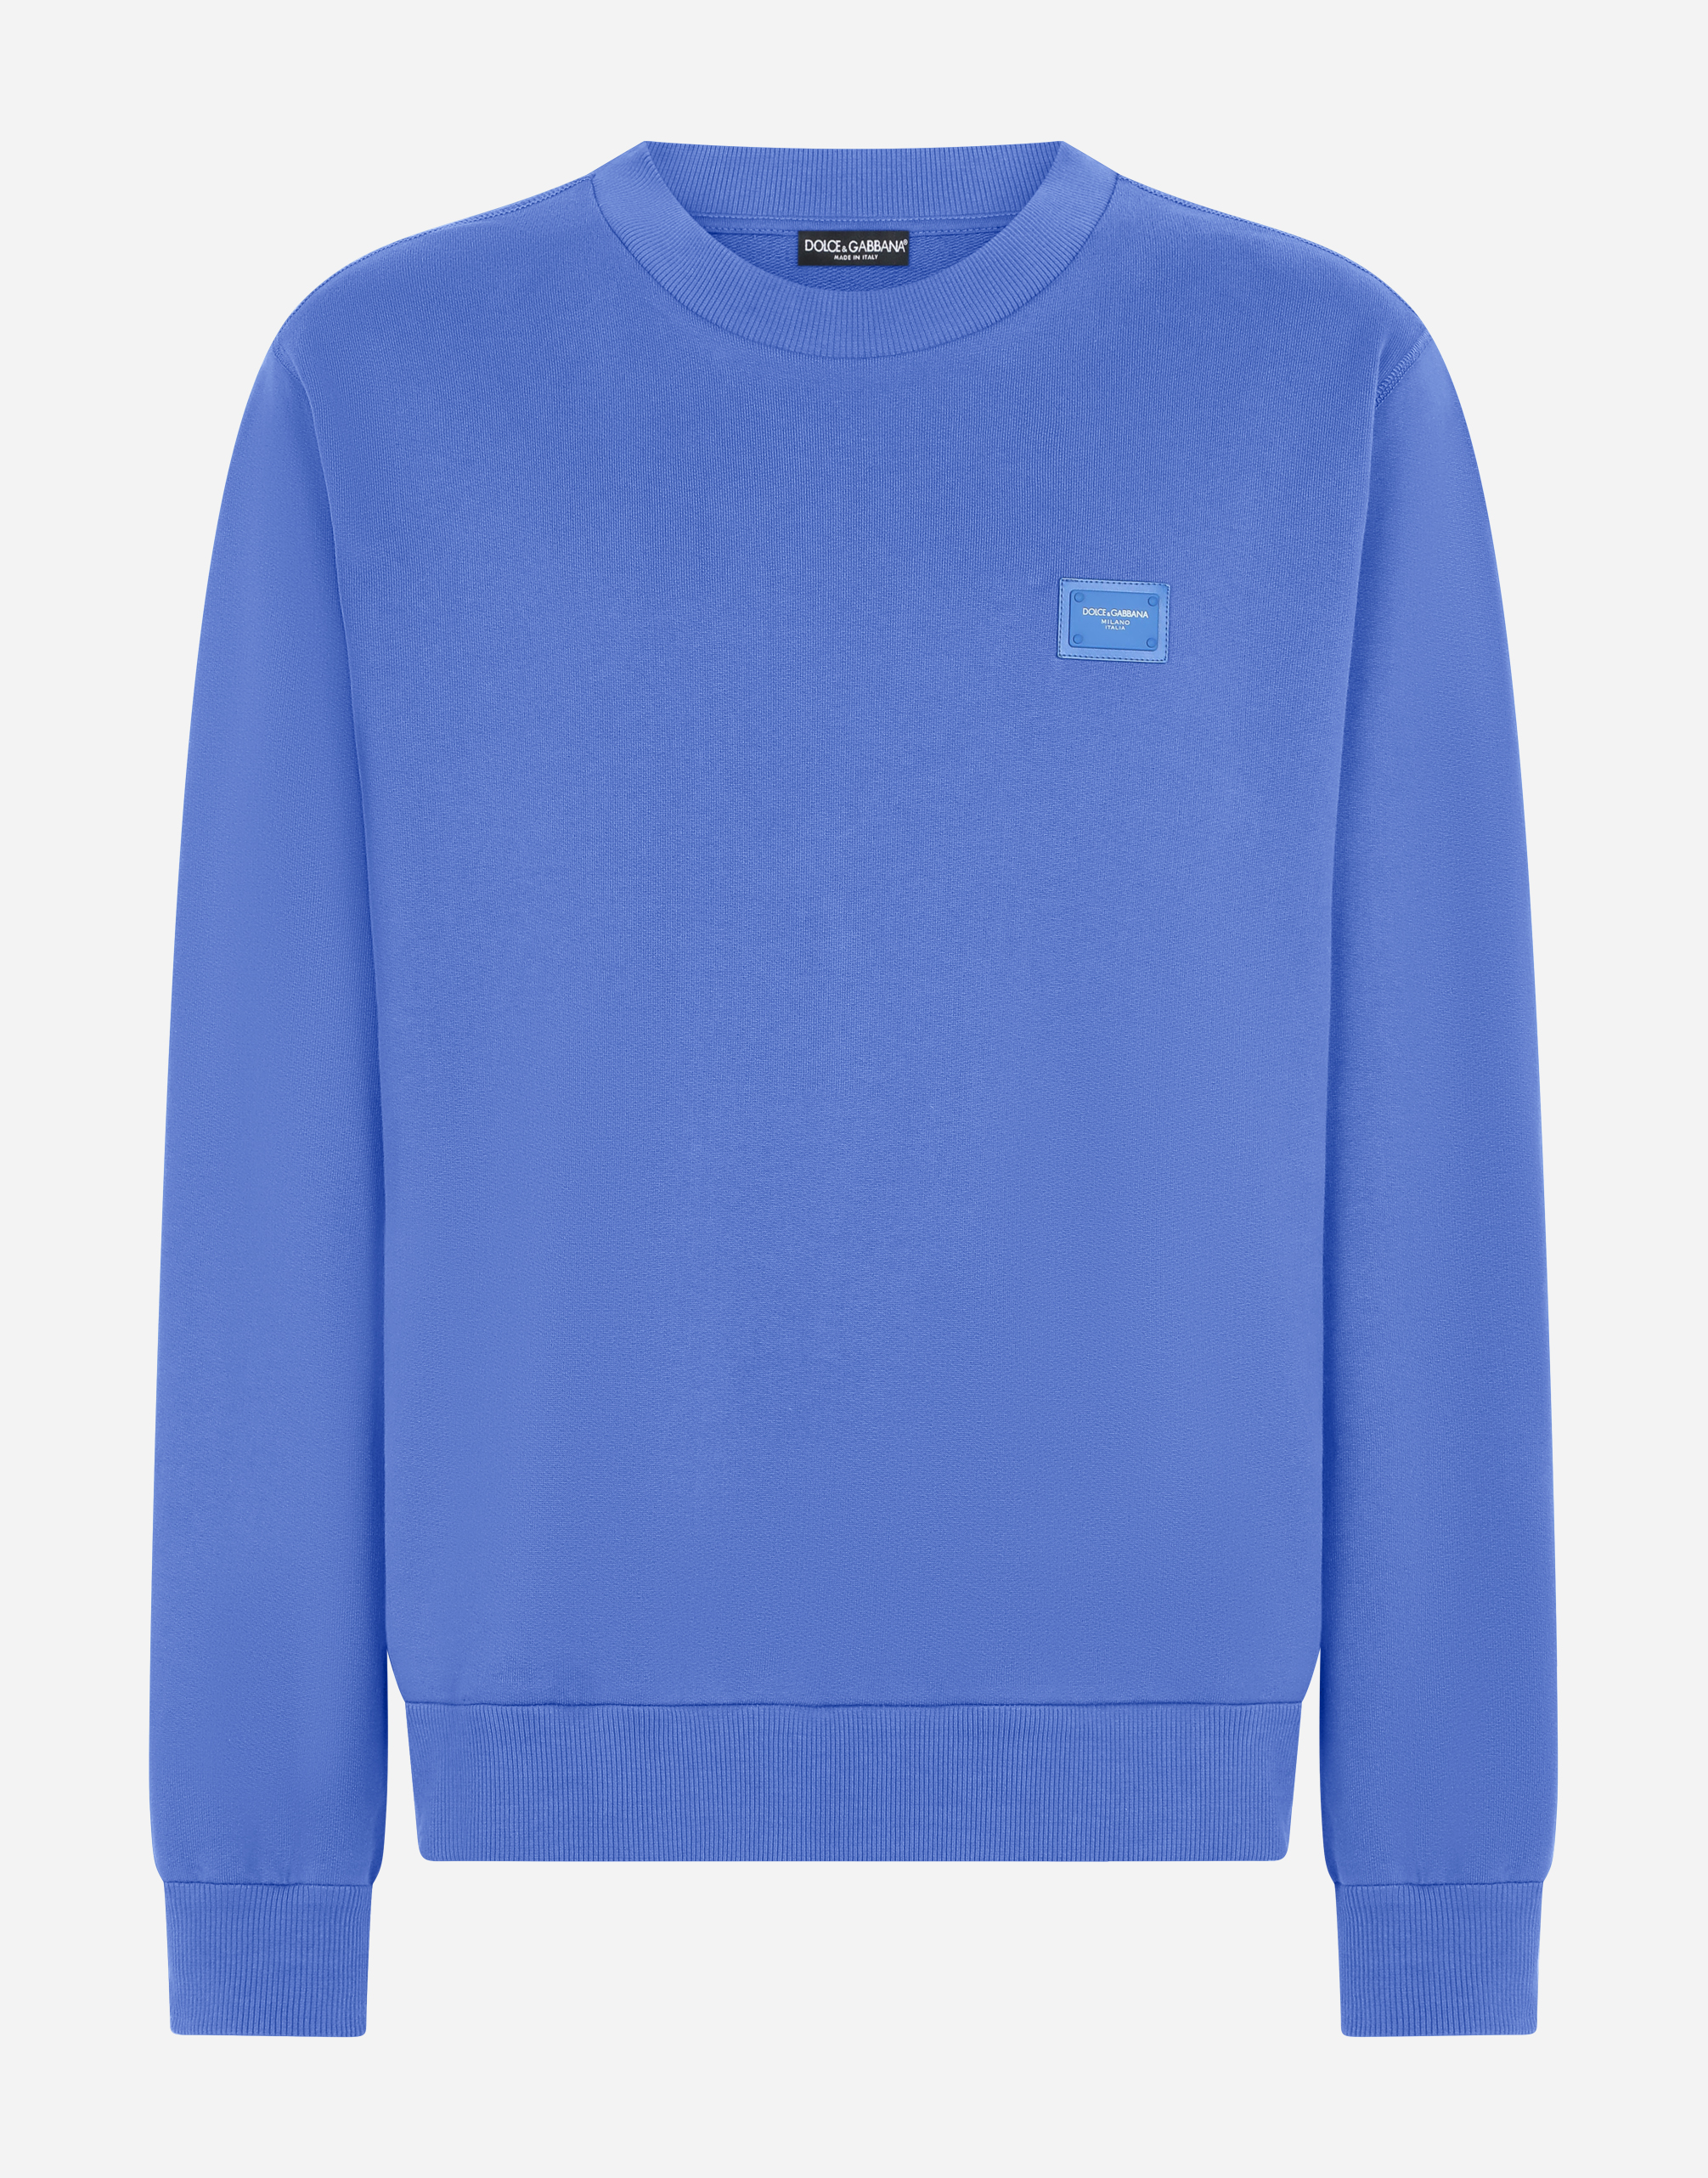 Jersey sweatshirt with branded tag in Blue